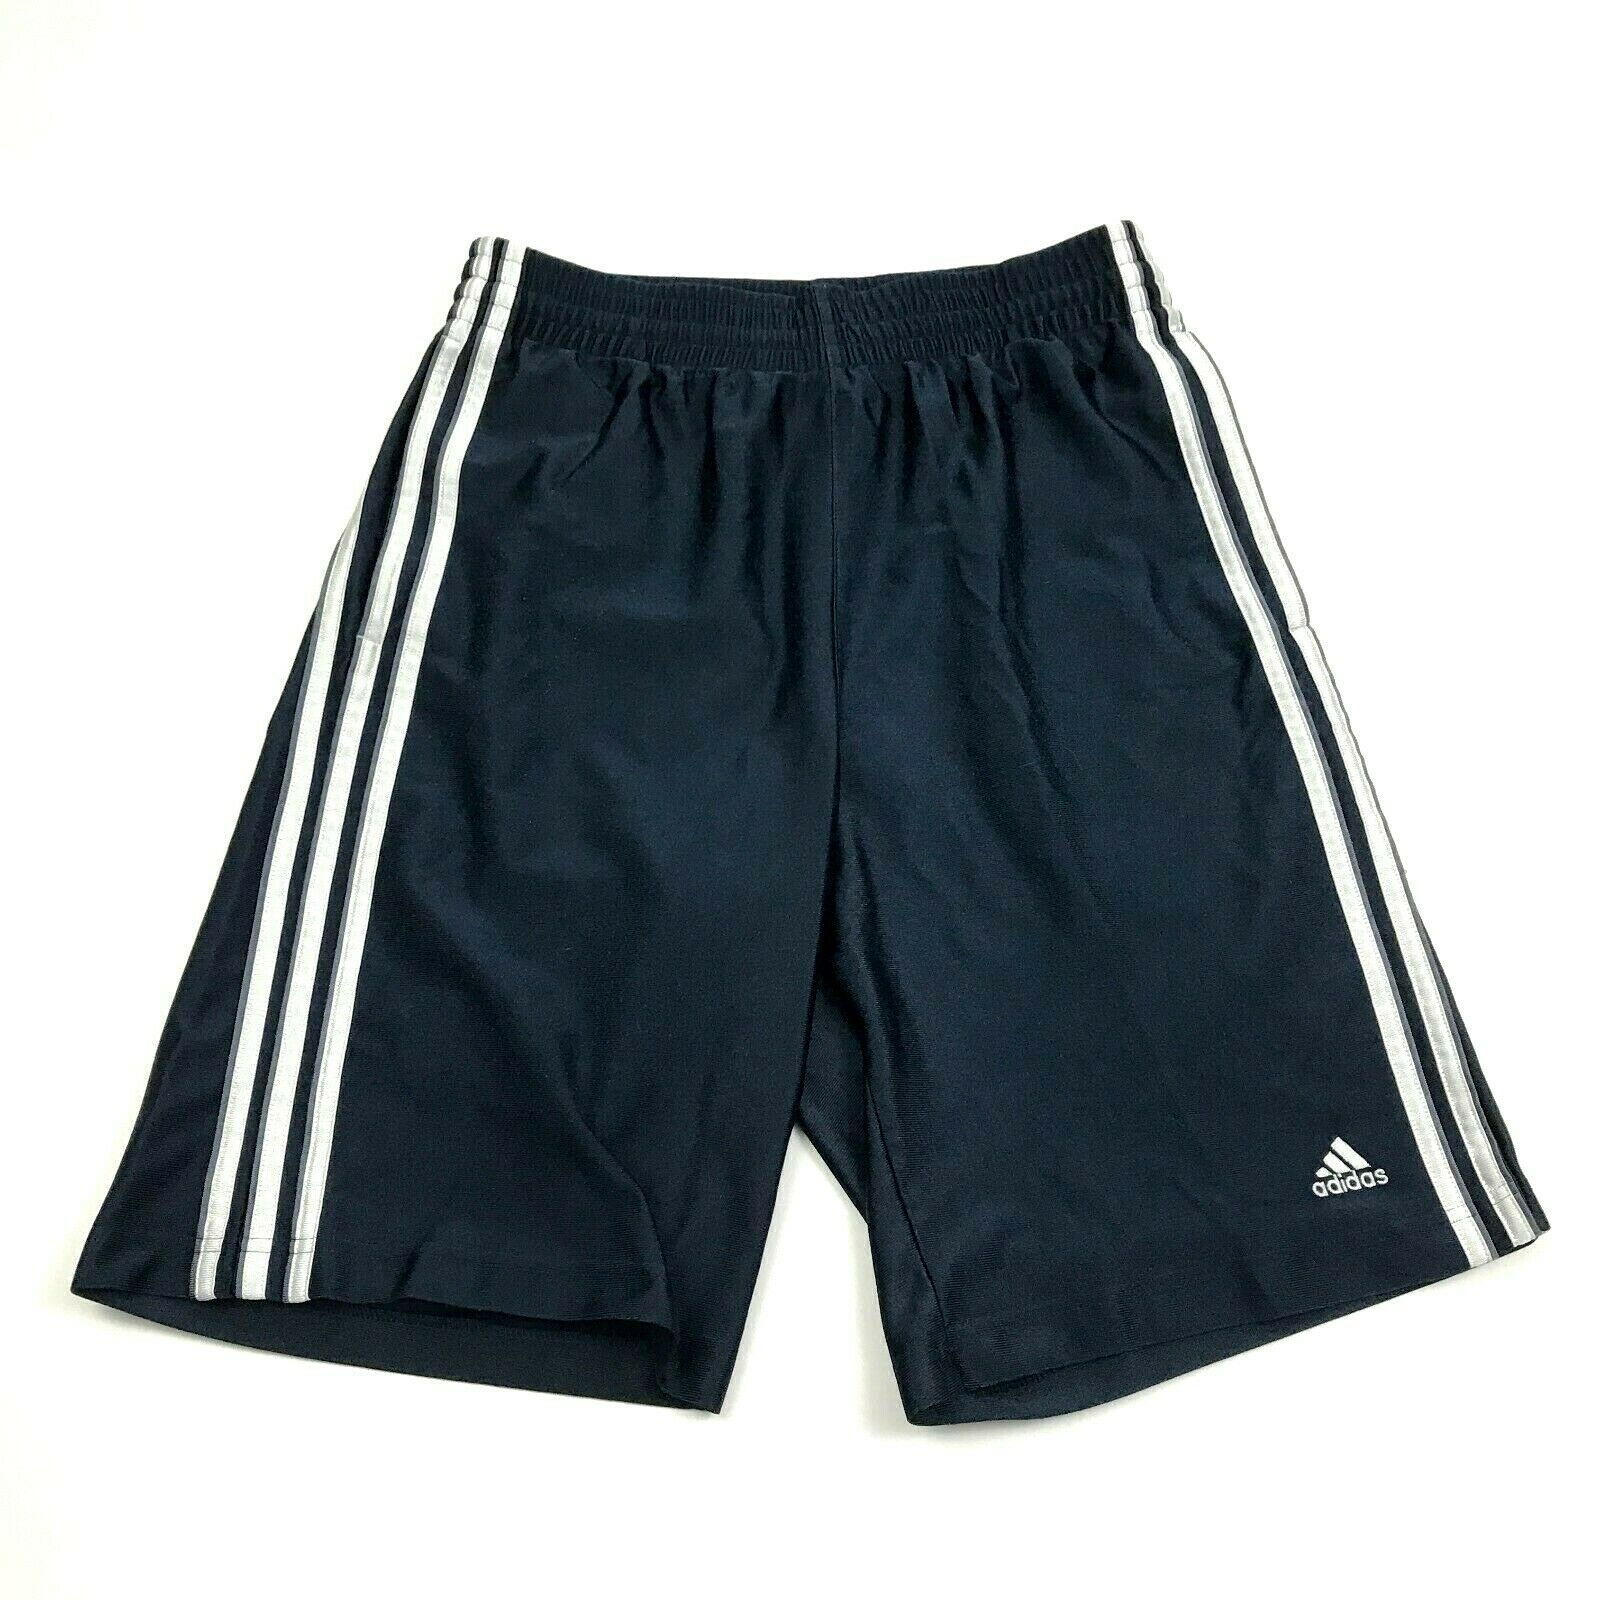 Adidas Basketball Shorts Size Small Adult Blue Workout Bottoms Athletic ...